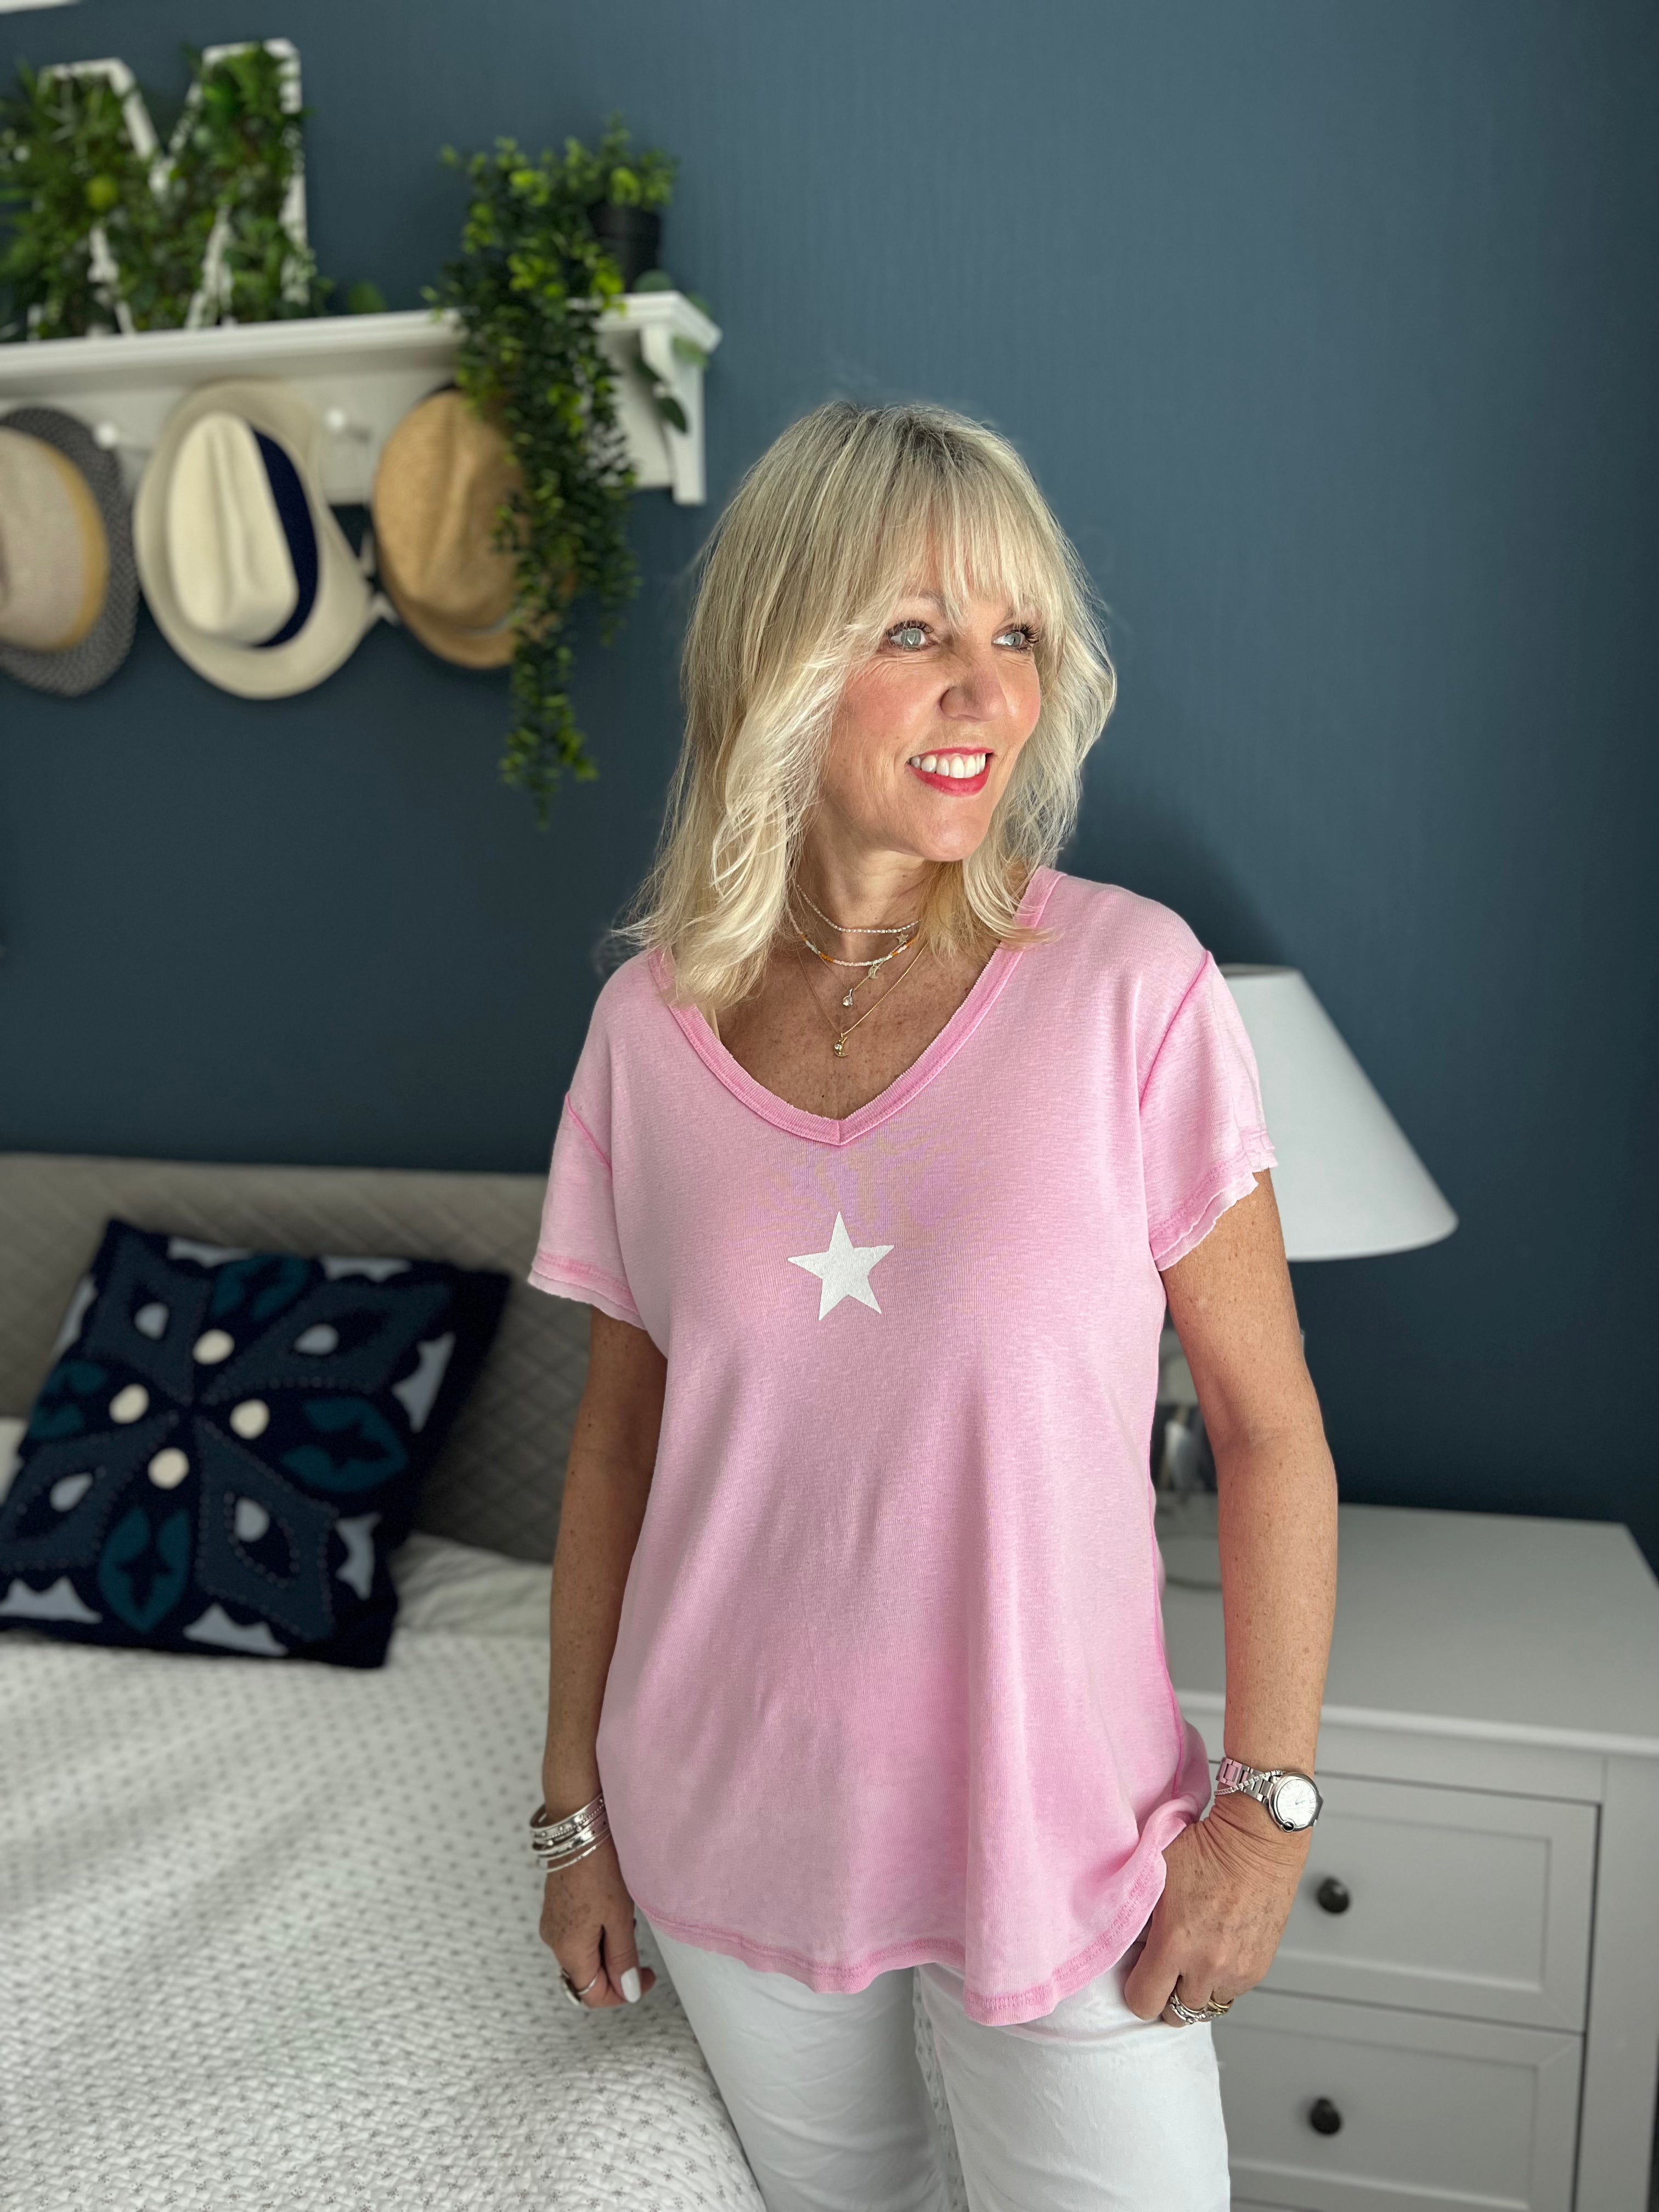 Vintage Star Tee in Light Candy Pink